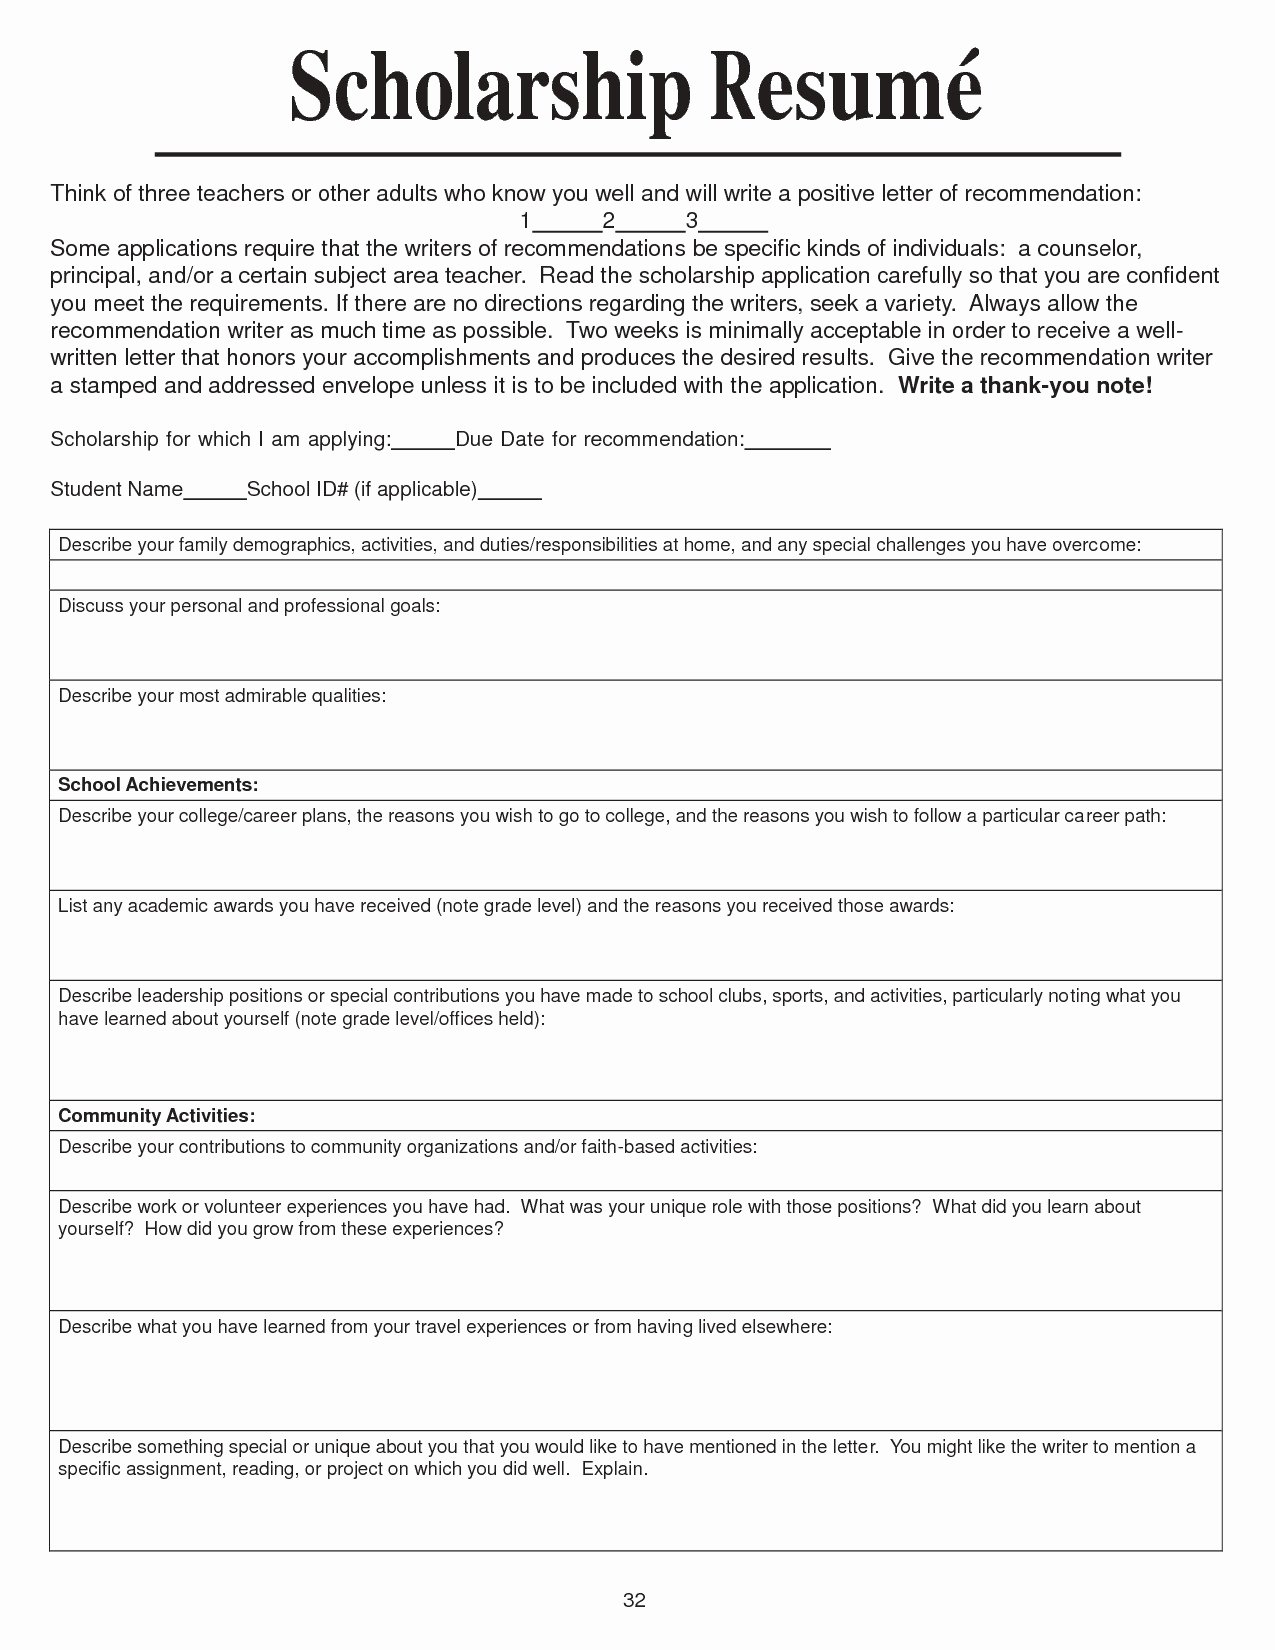 College Scholarship Resume Template Resume Objective for